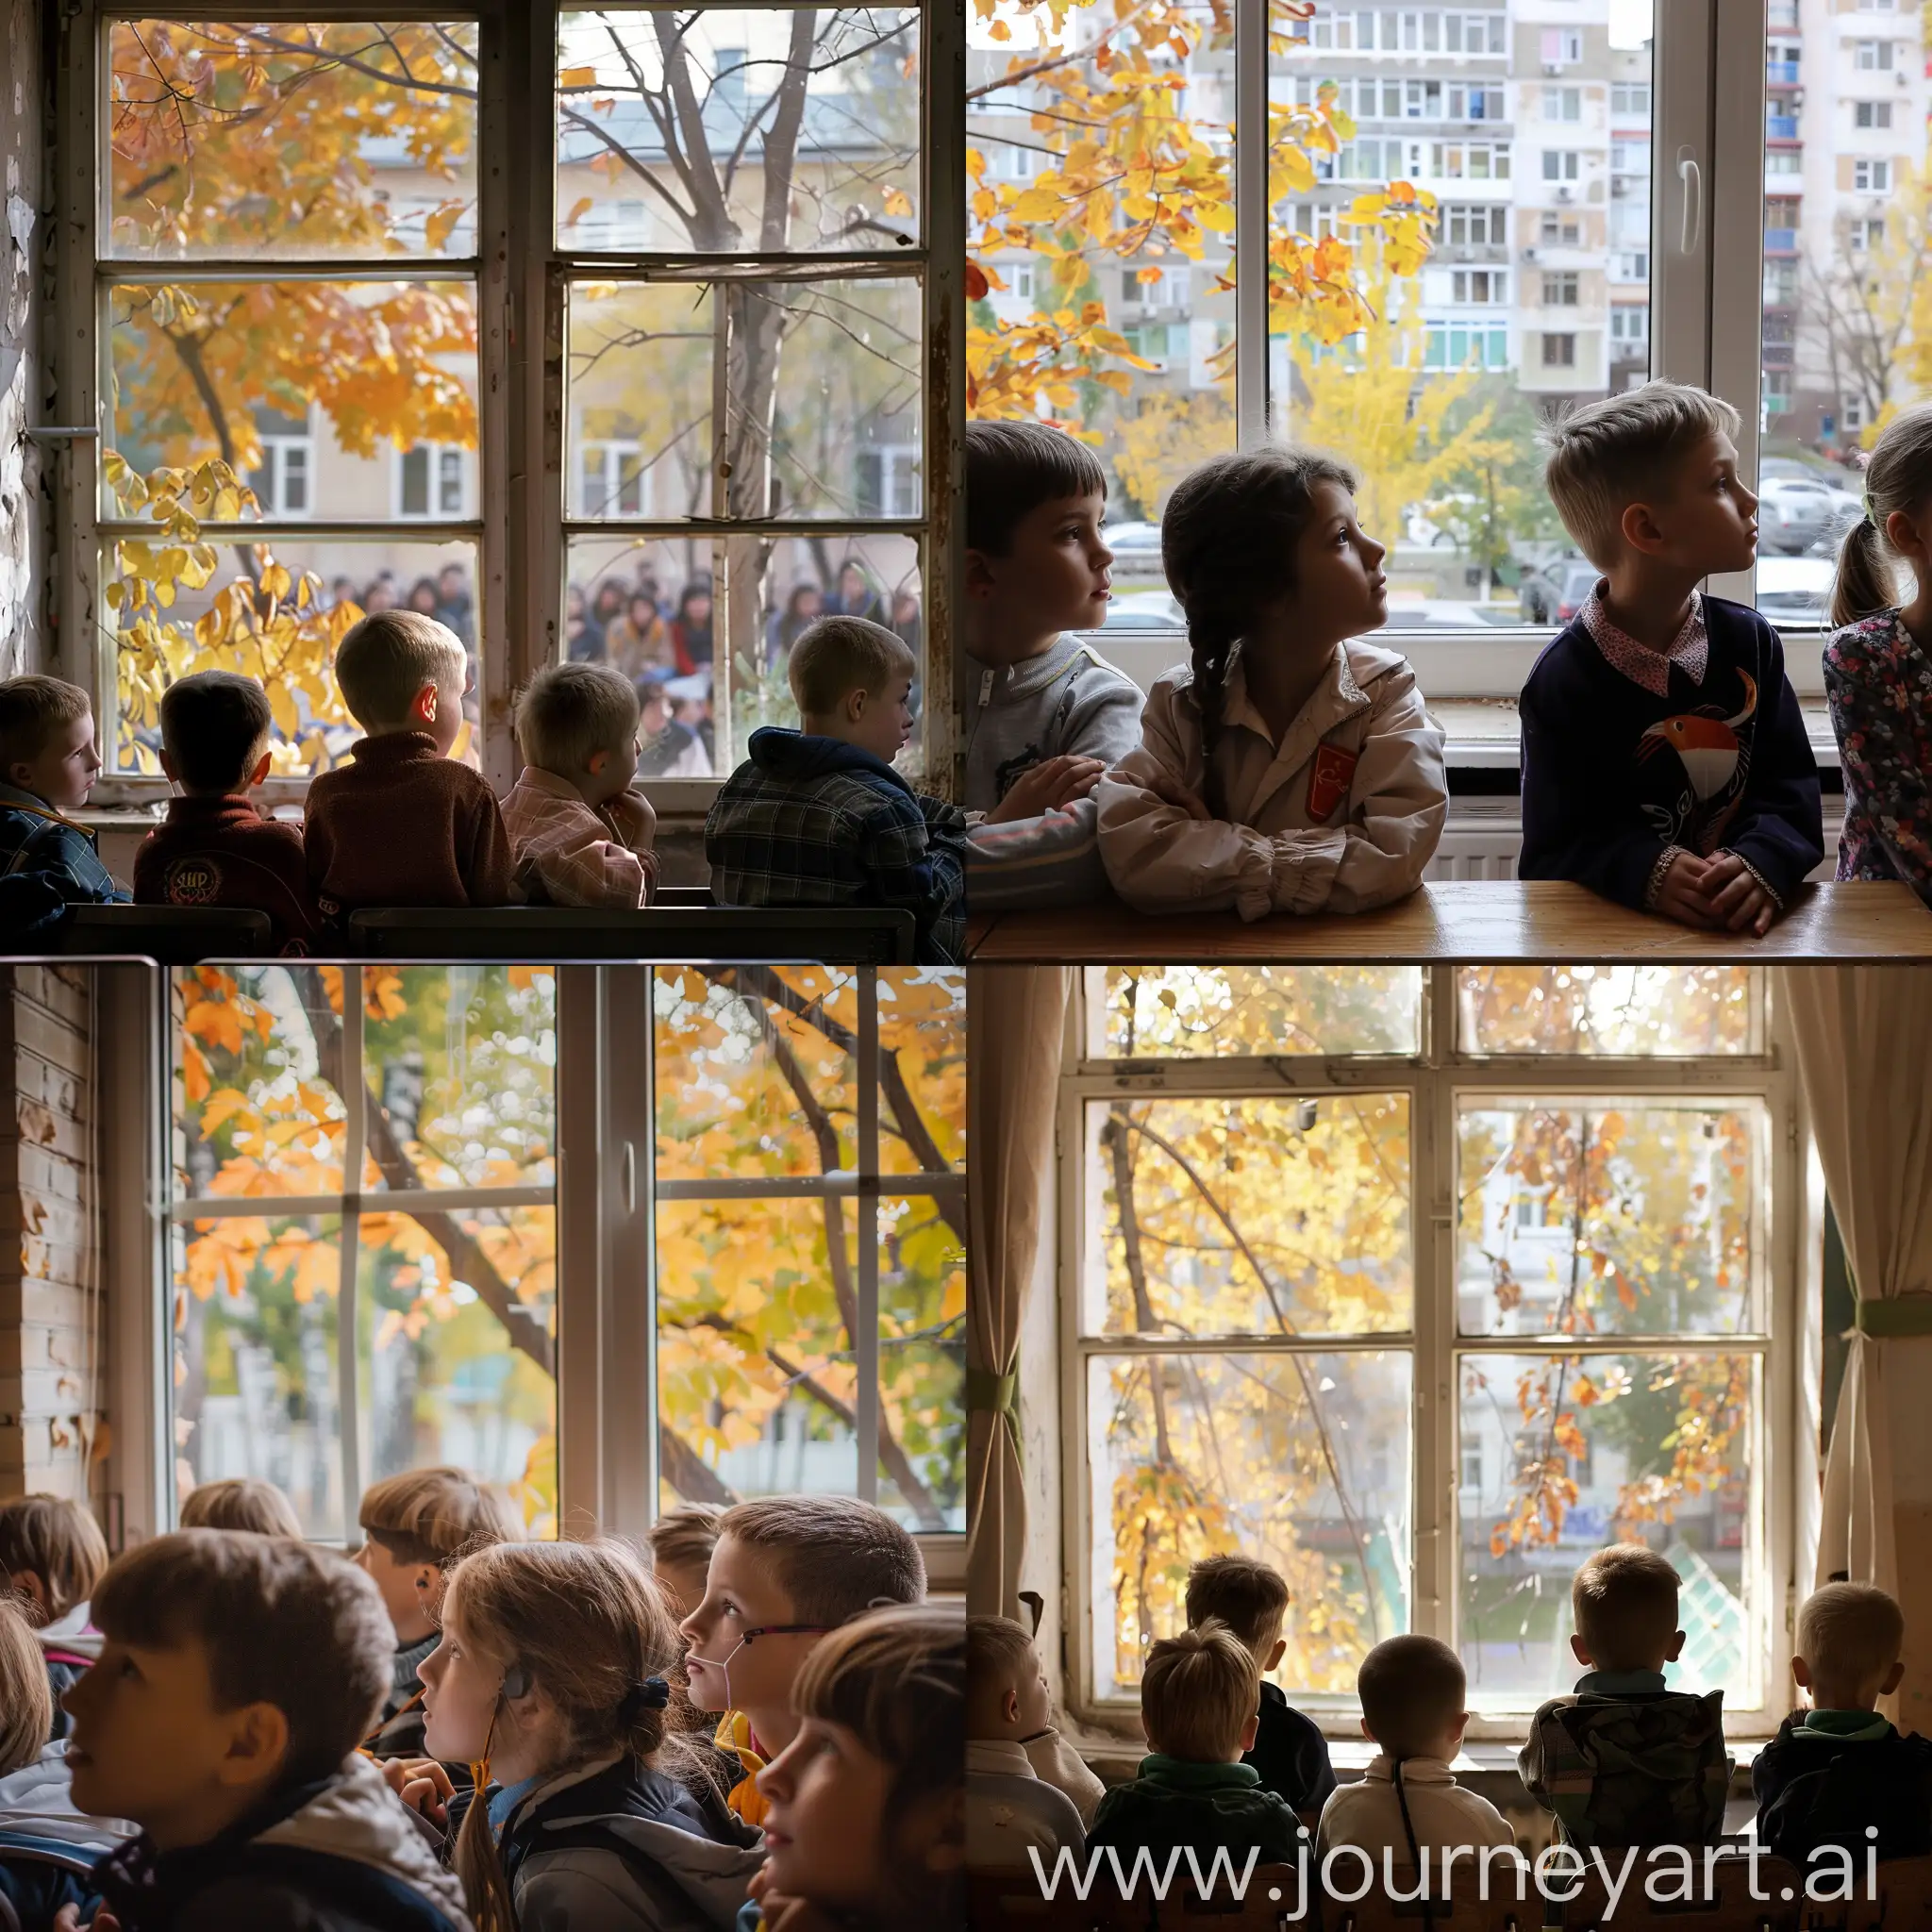 Russian-School-Classroom-on-First-September-Students-Listening-in-Autumn-Ambiance